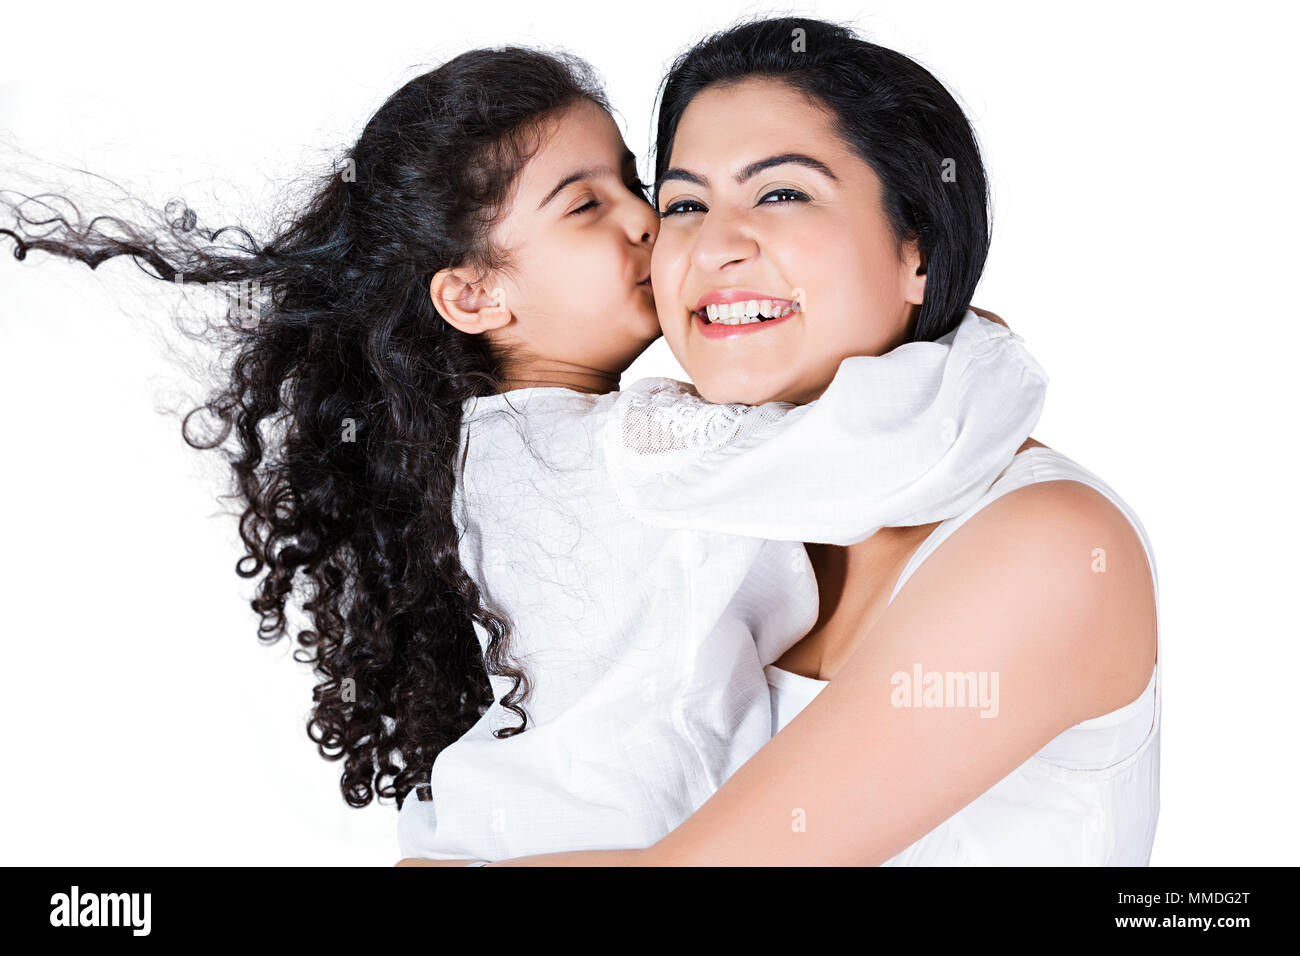 Happy Kid Girl Daughter Giving A Kiss To Her Mother Loving Fun Stock Photo